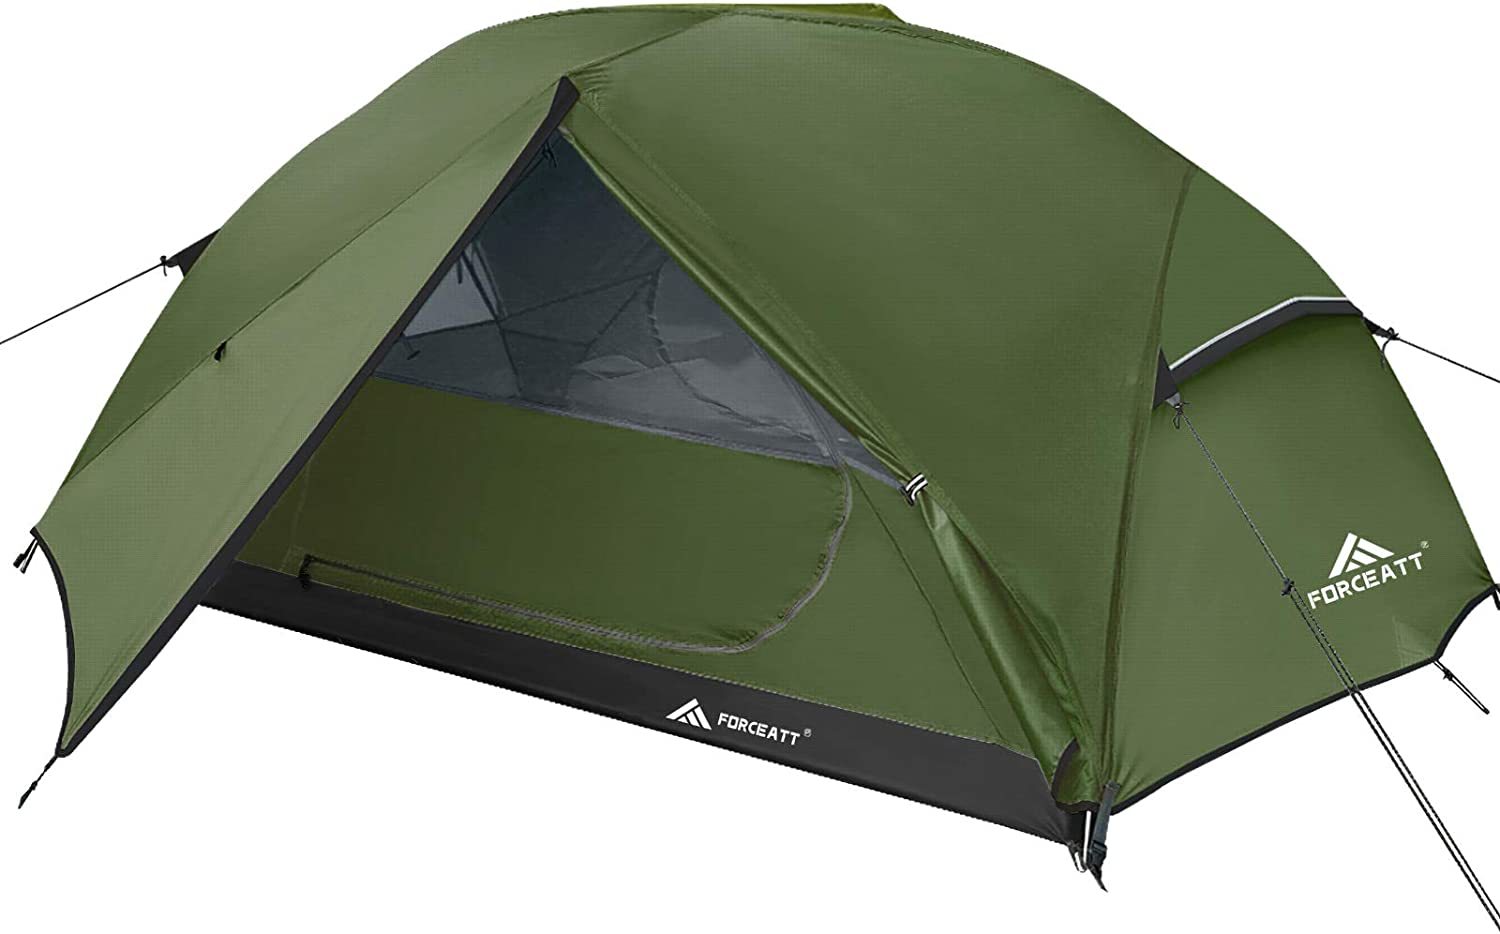 Primary image for Forceatt Tent For 2 And 3 Person Is Waterproof And Windproof,, Great For Hiking.